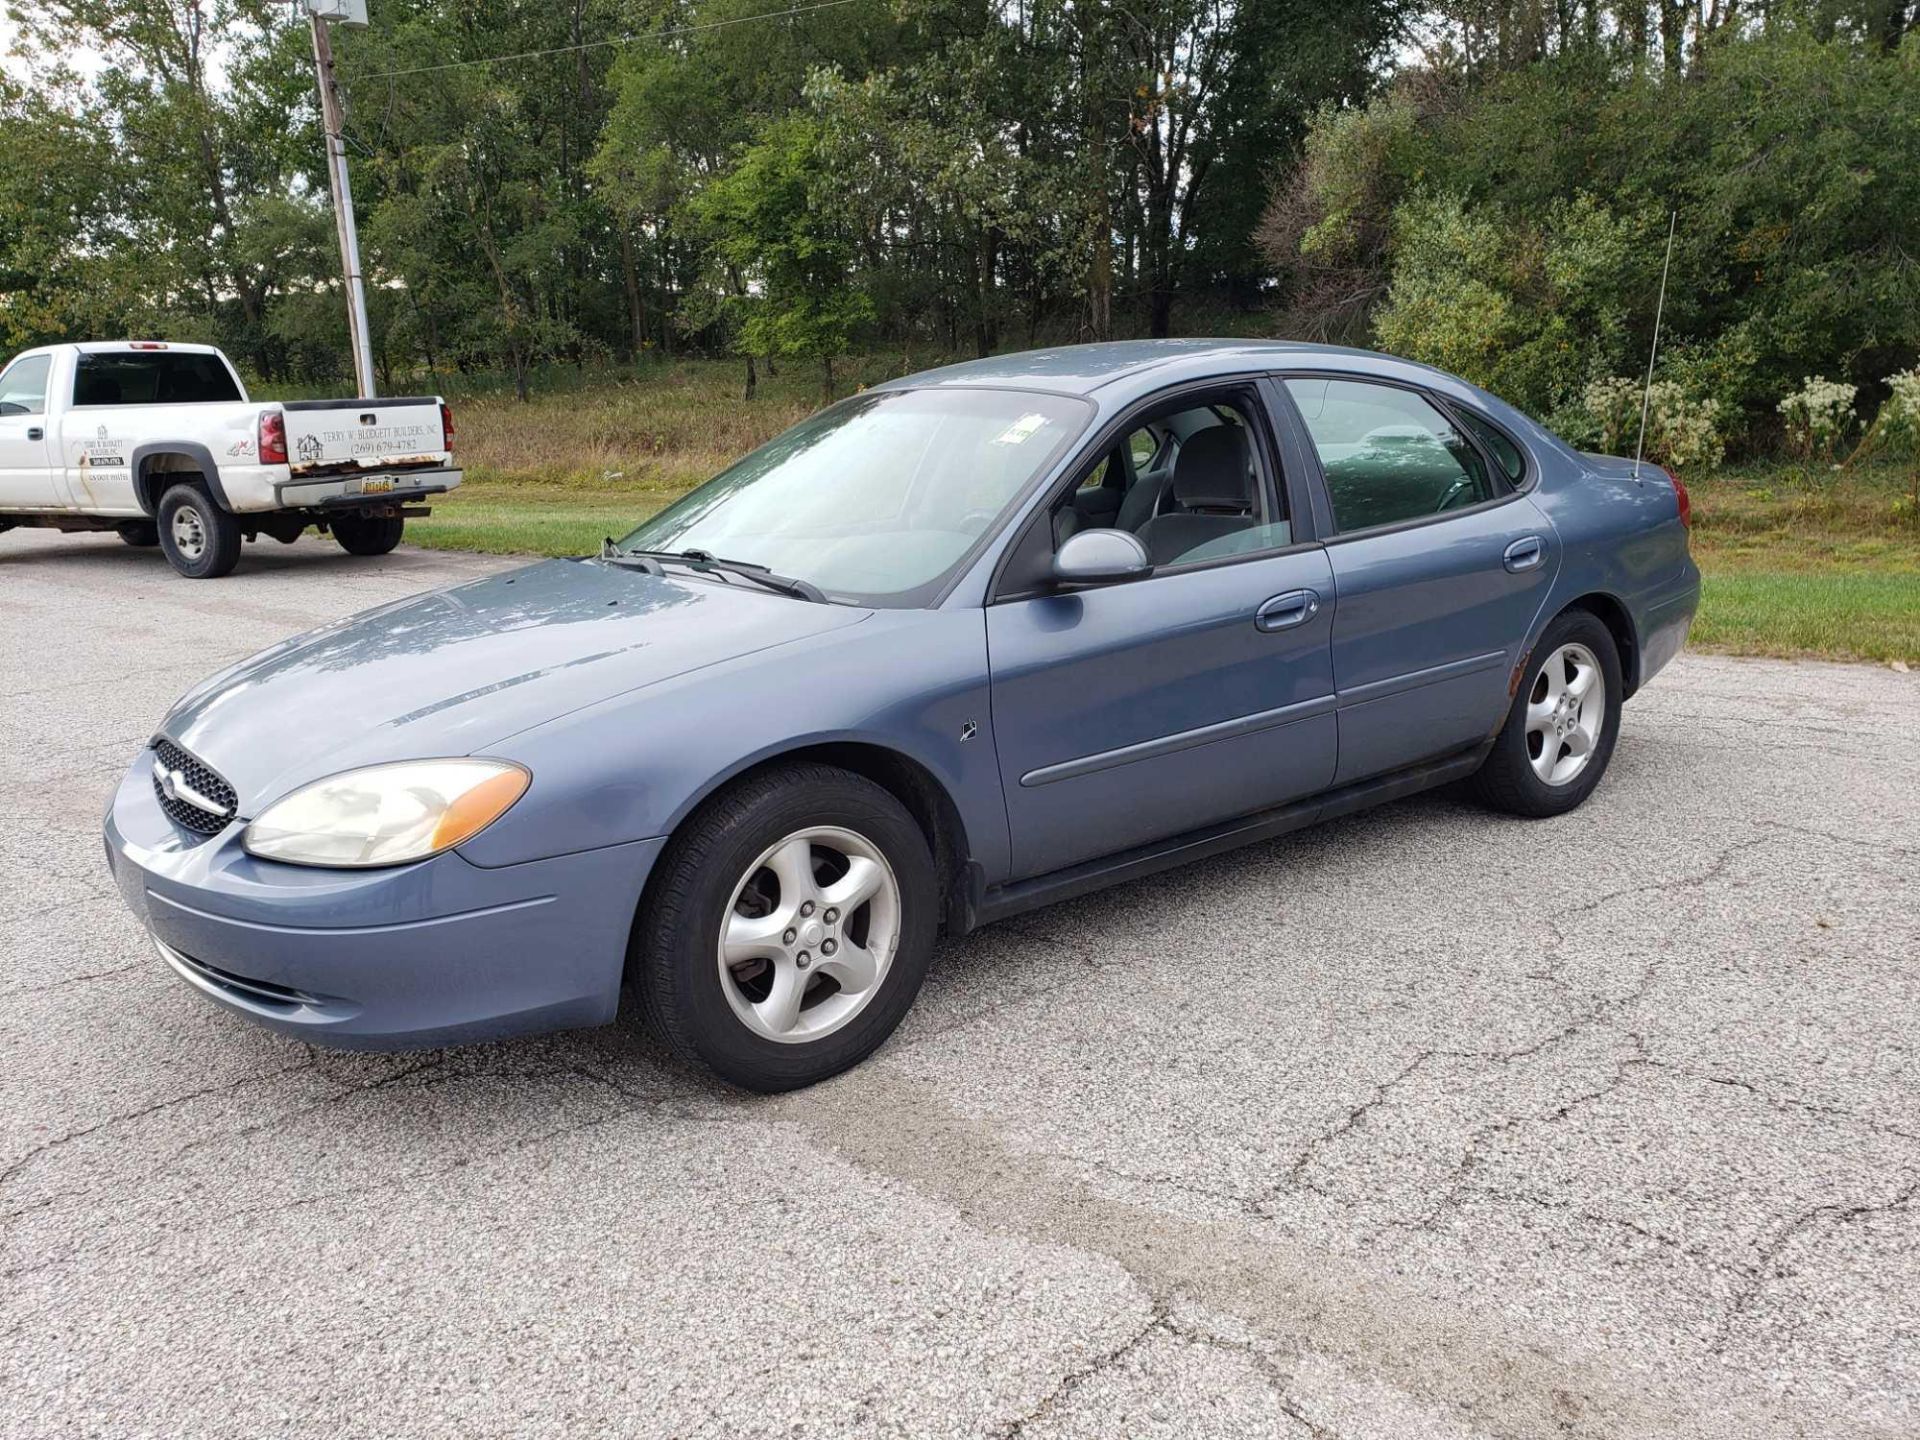 2001 Ford Taurus VIN 1FAFP53291G230229, 70,126 miles. Municipally owned and maintained.